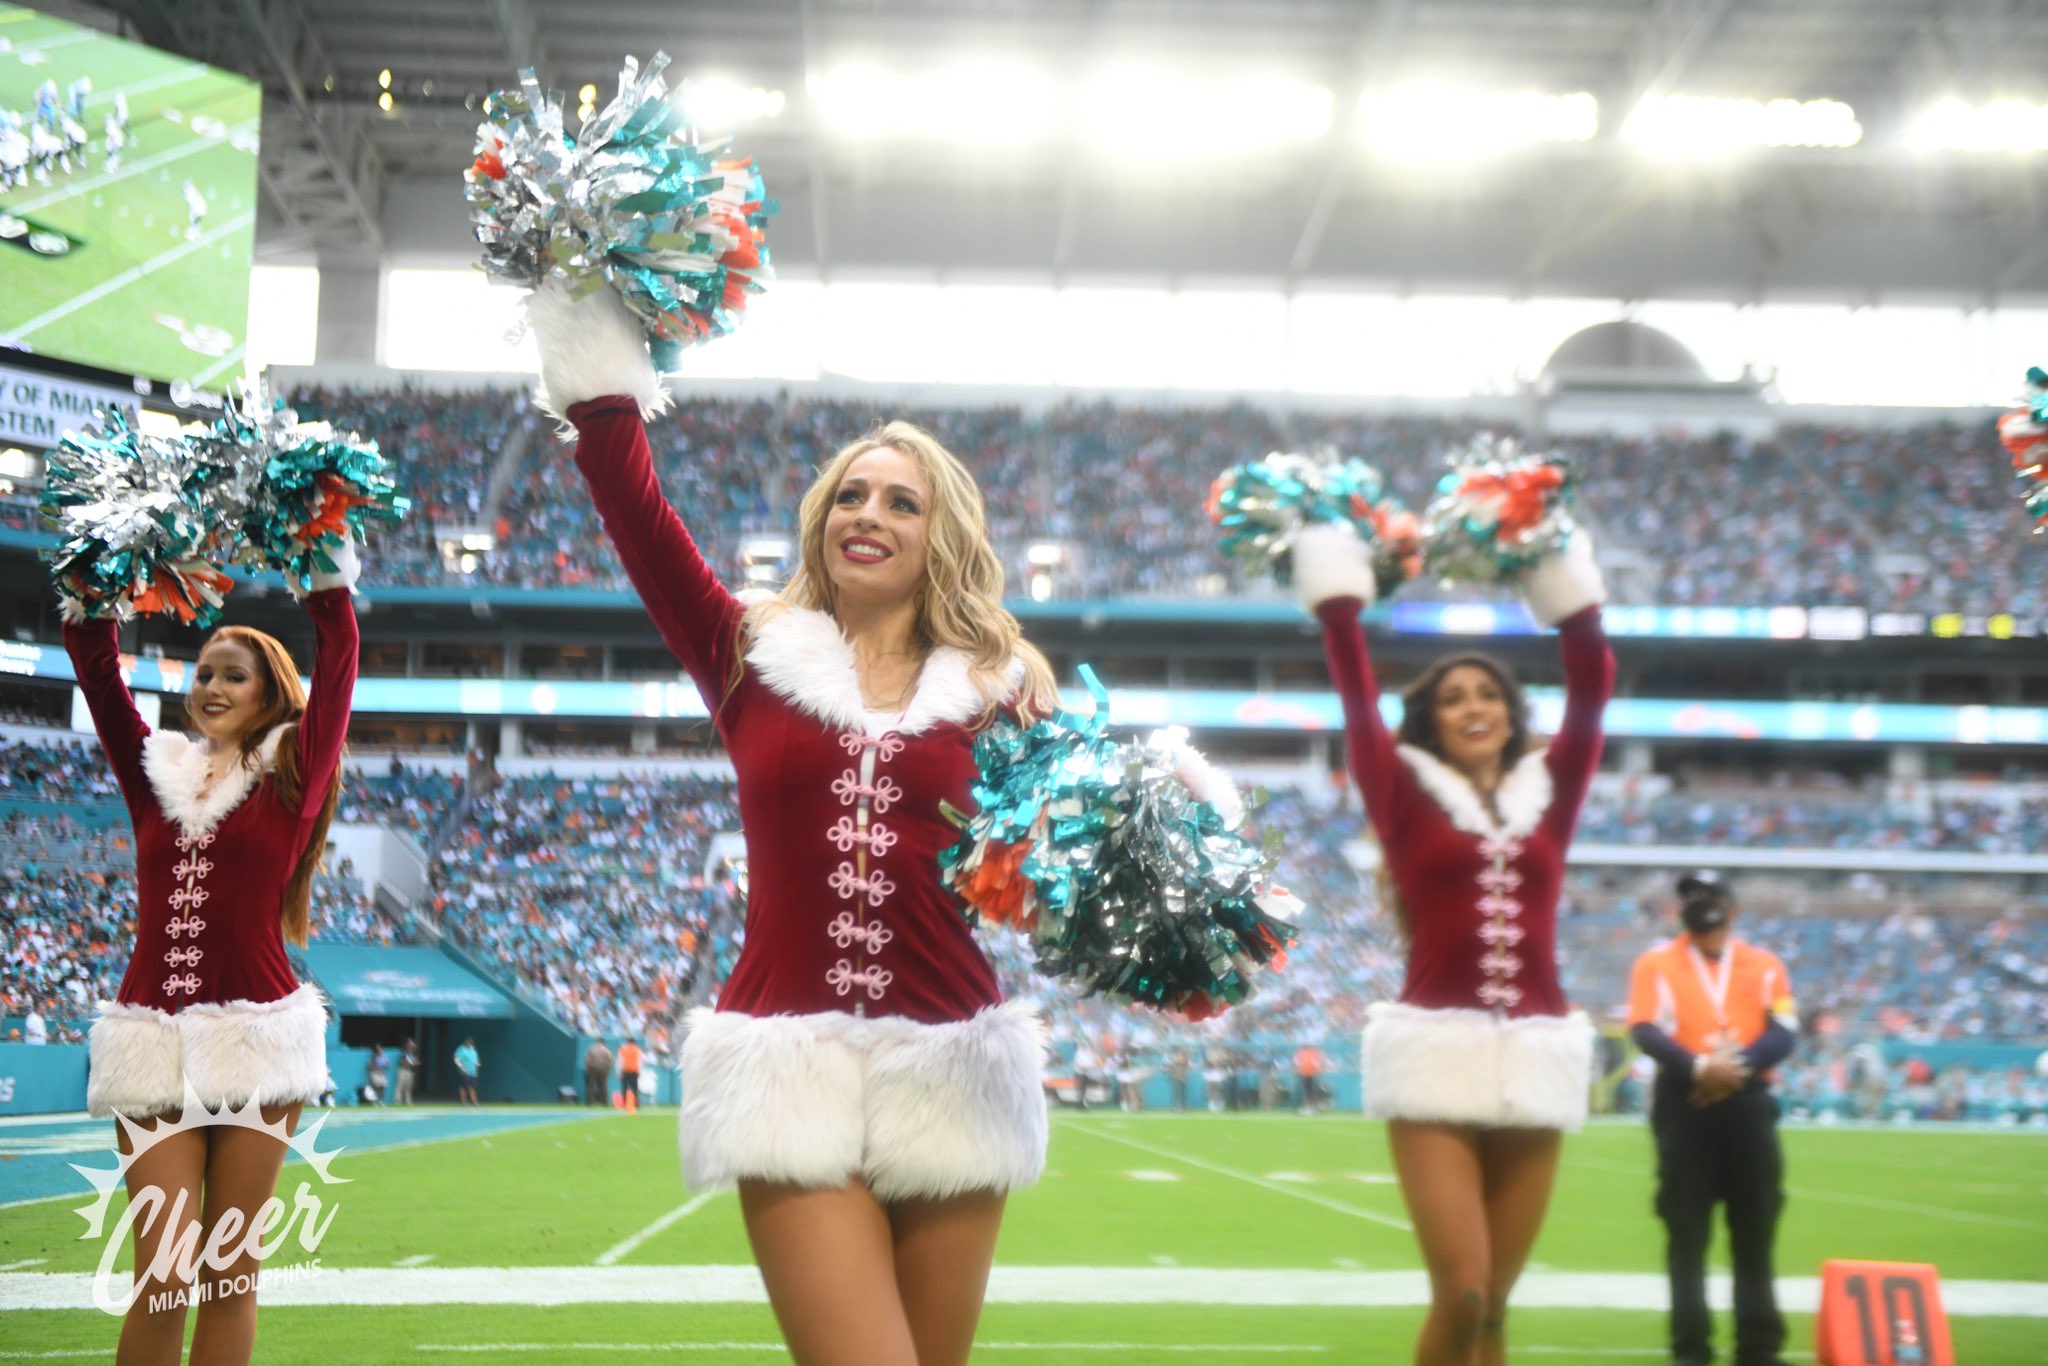 DVIDS - Images - Miami Dolphins spread holiday cheer to troops in